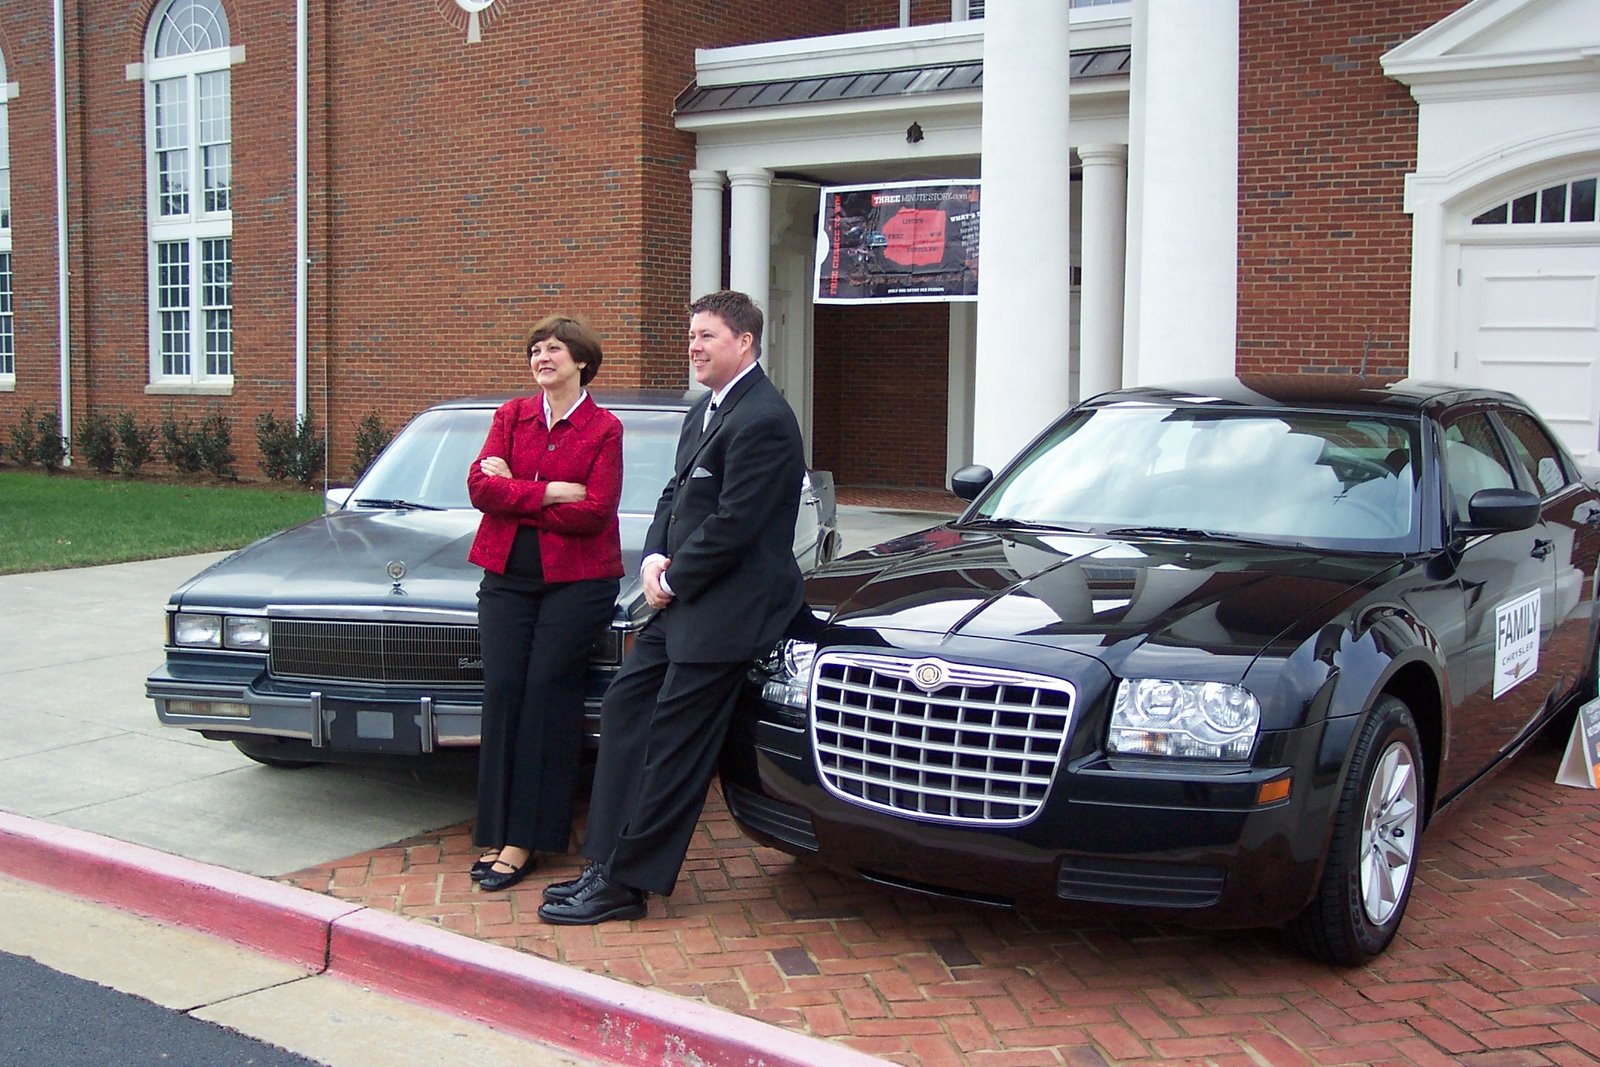 [Ronnie+and+Carol+with+cars.JPG]